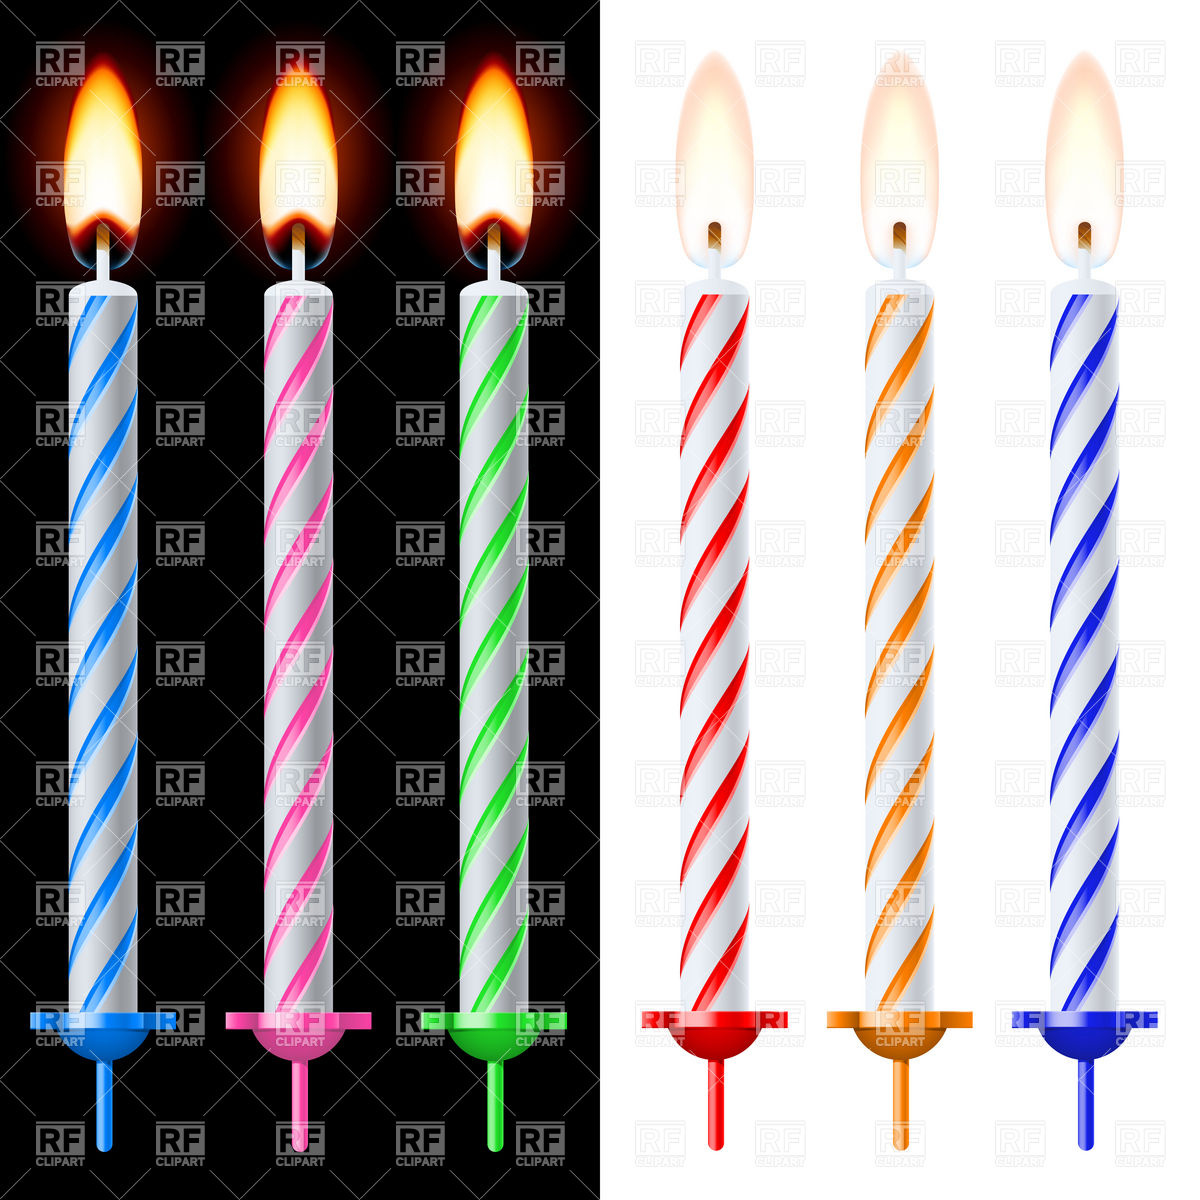 Colorful Birthday Cake Candles 7393 Objects Download Royalty Free